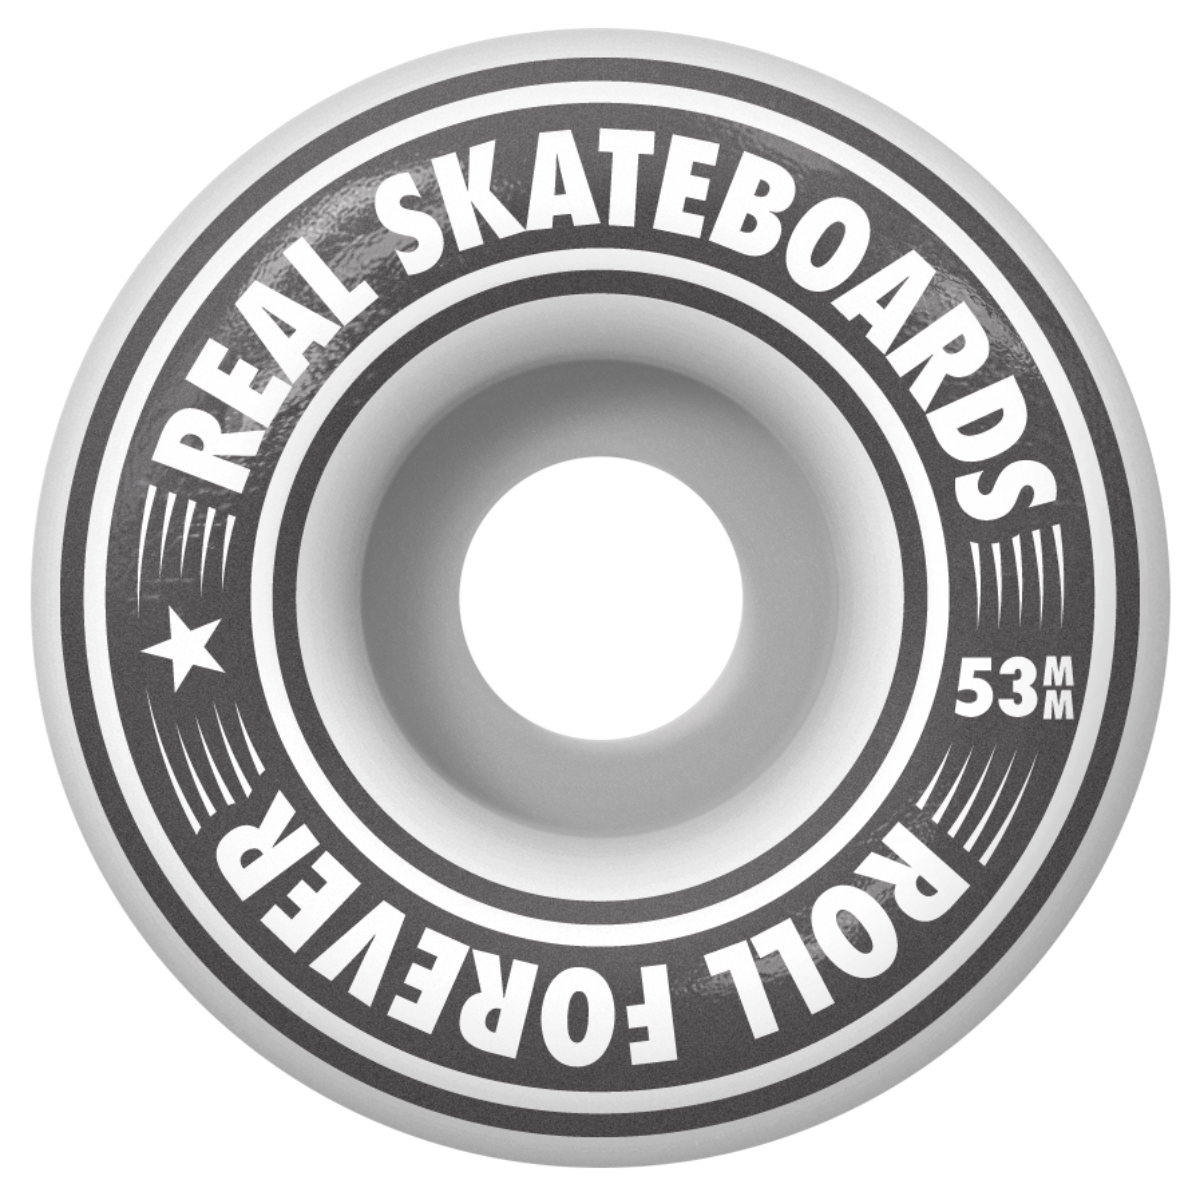 REAL COMPLETE - STEALTH OVALS MINI (7.3") - The Drive Skateshop